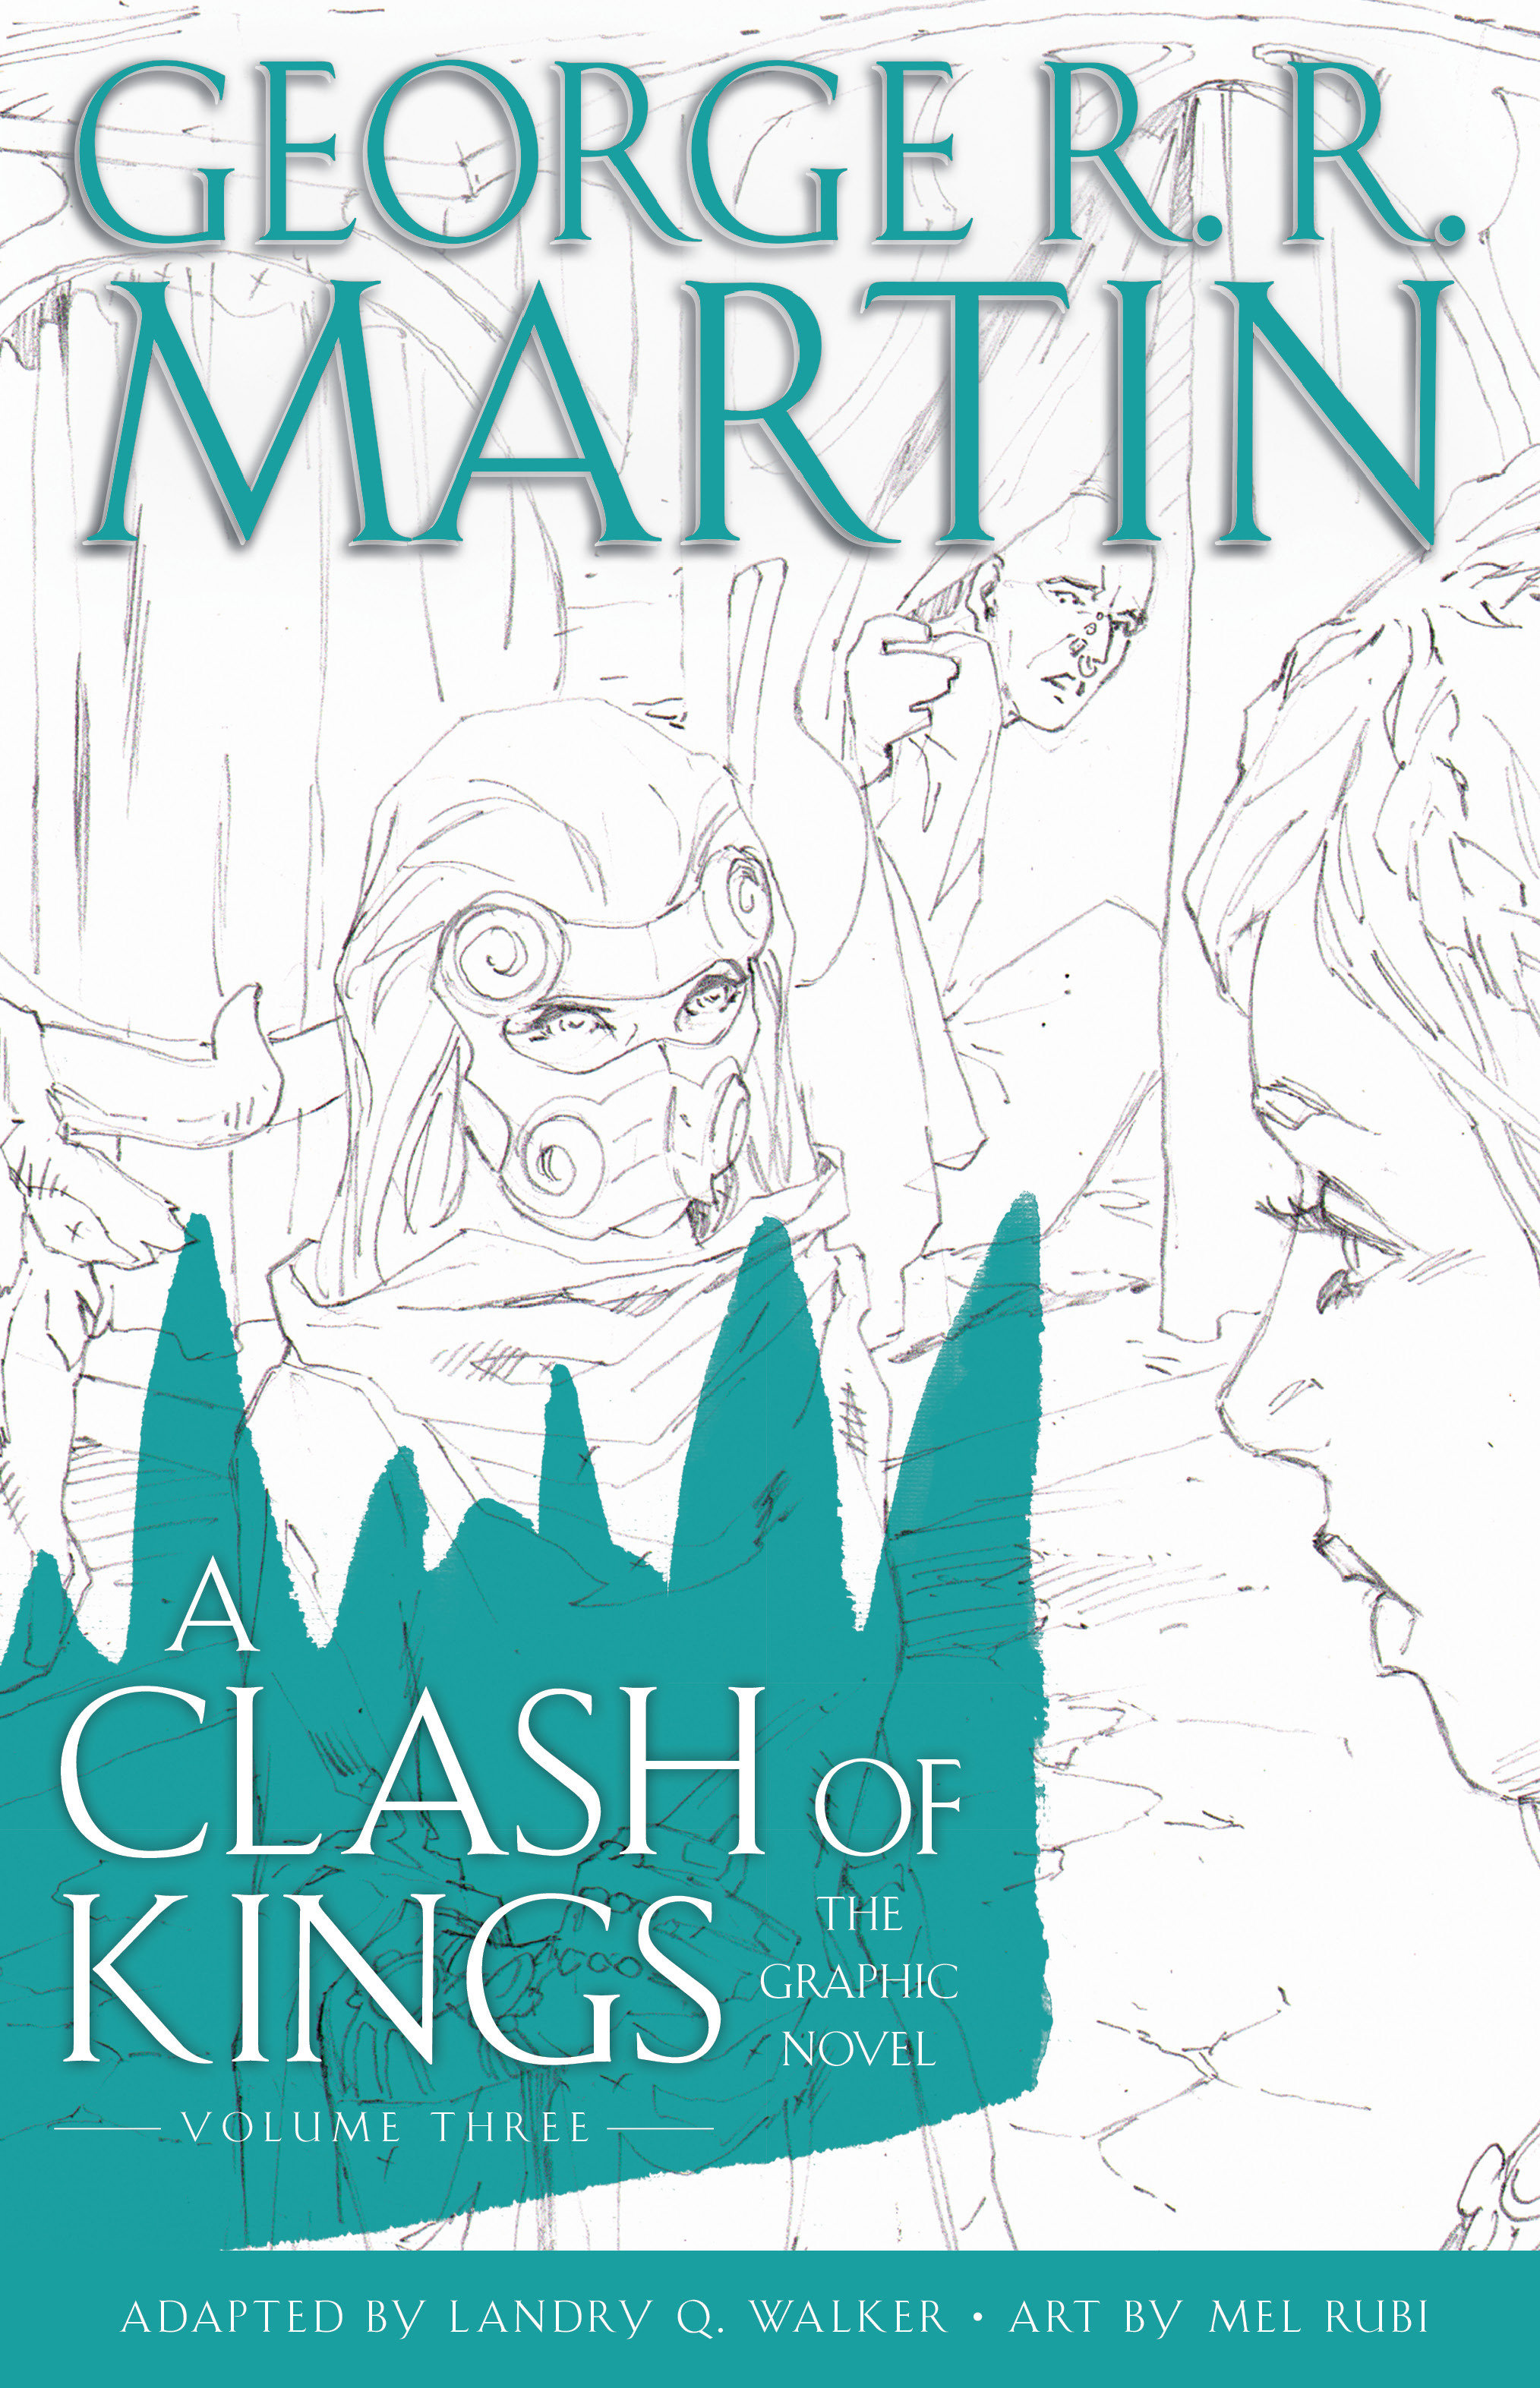 A Clash of Kings the Graphic Novel Volume Three